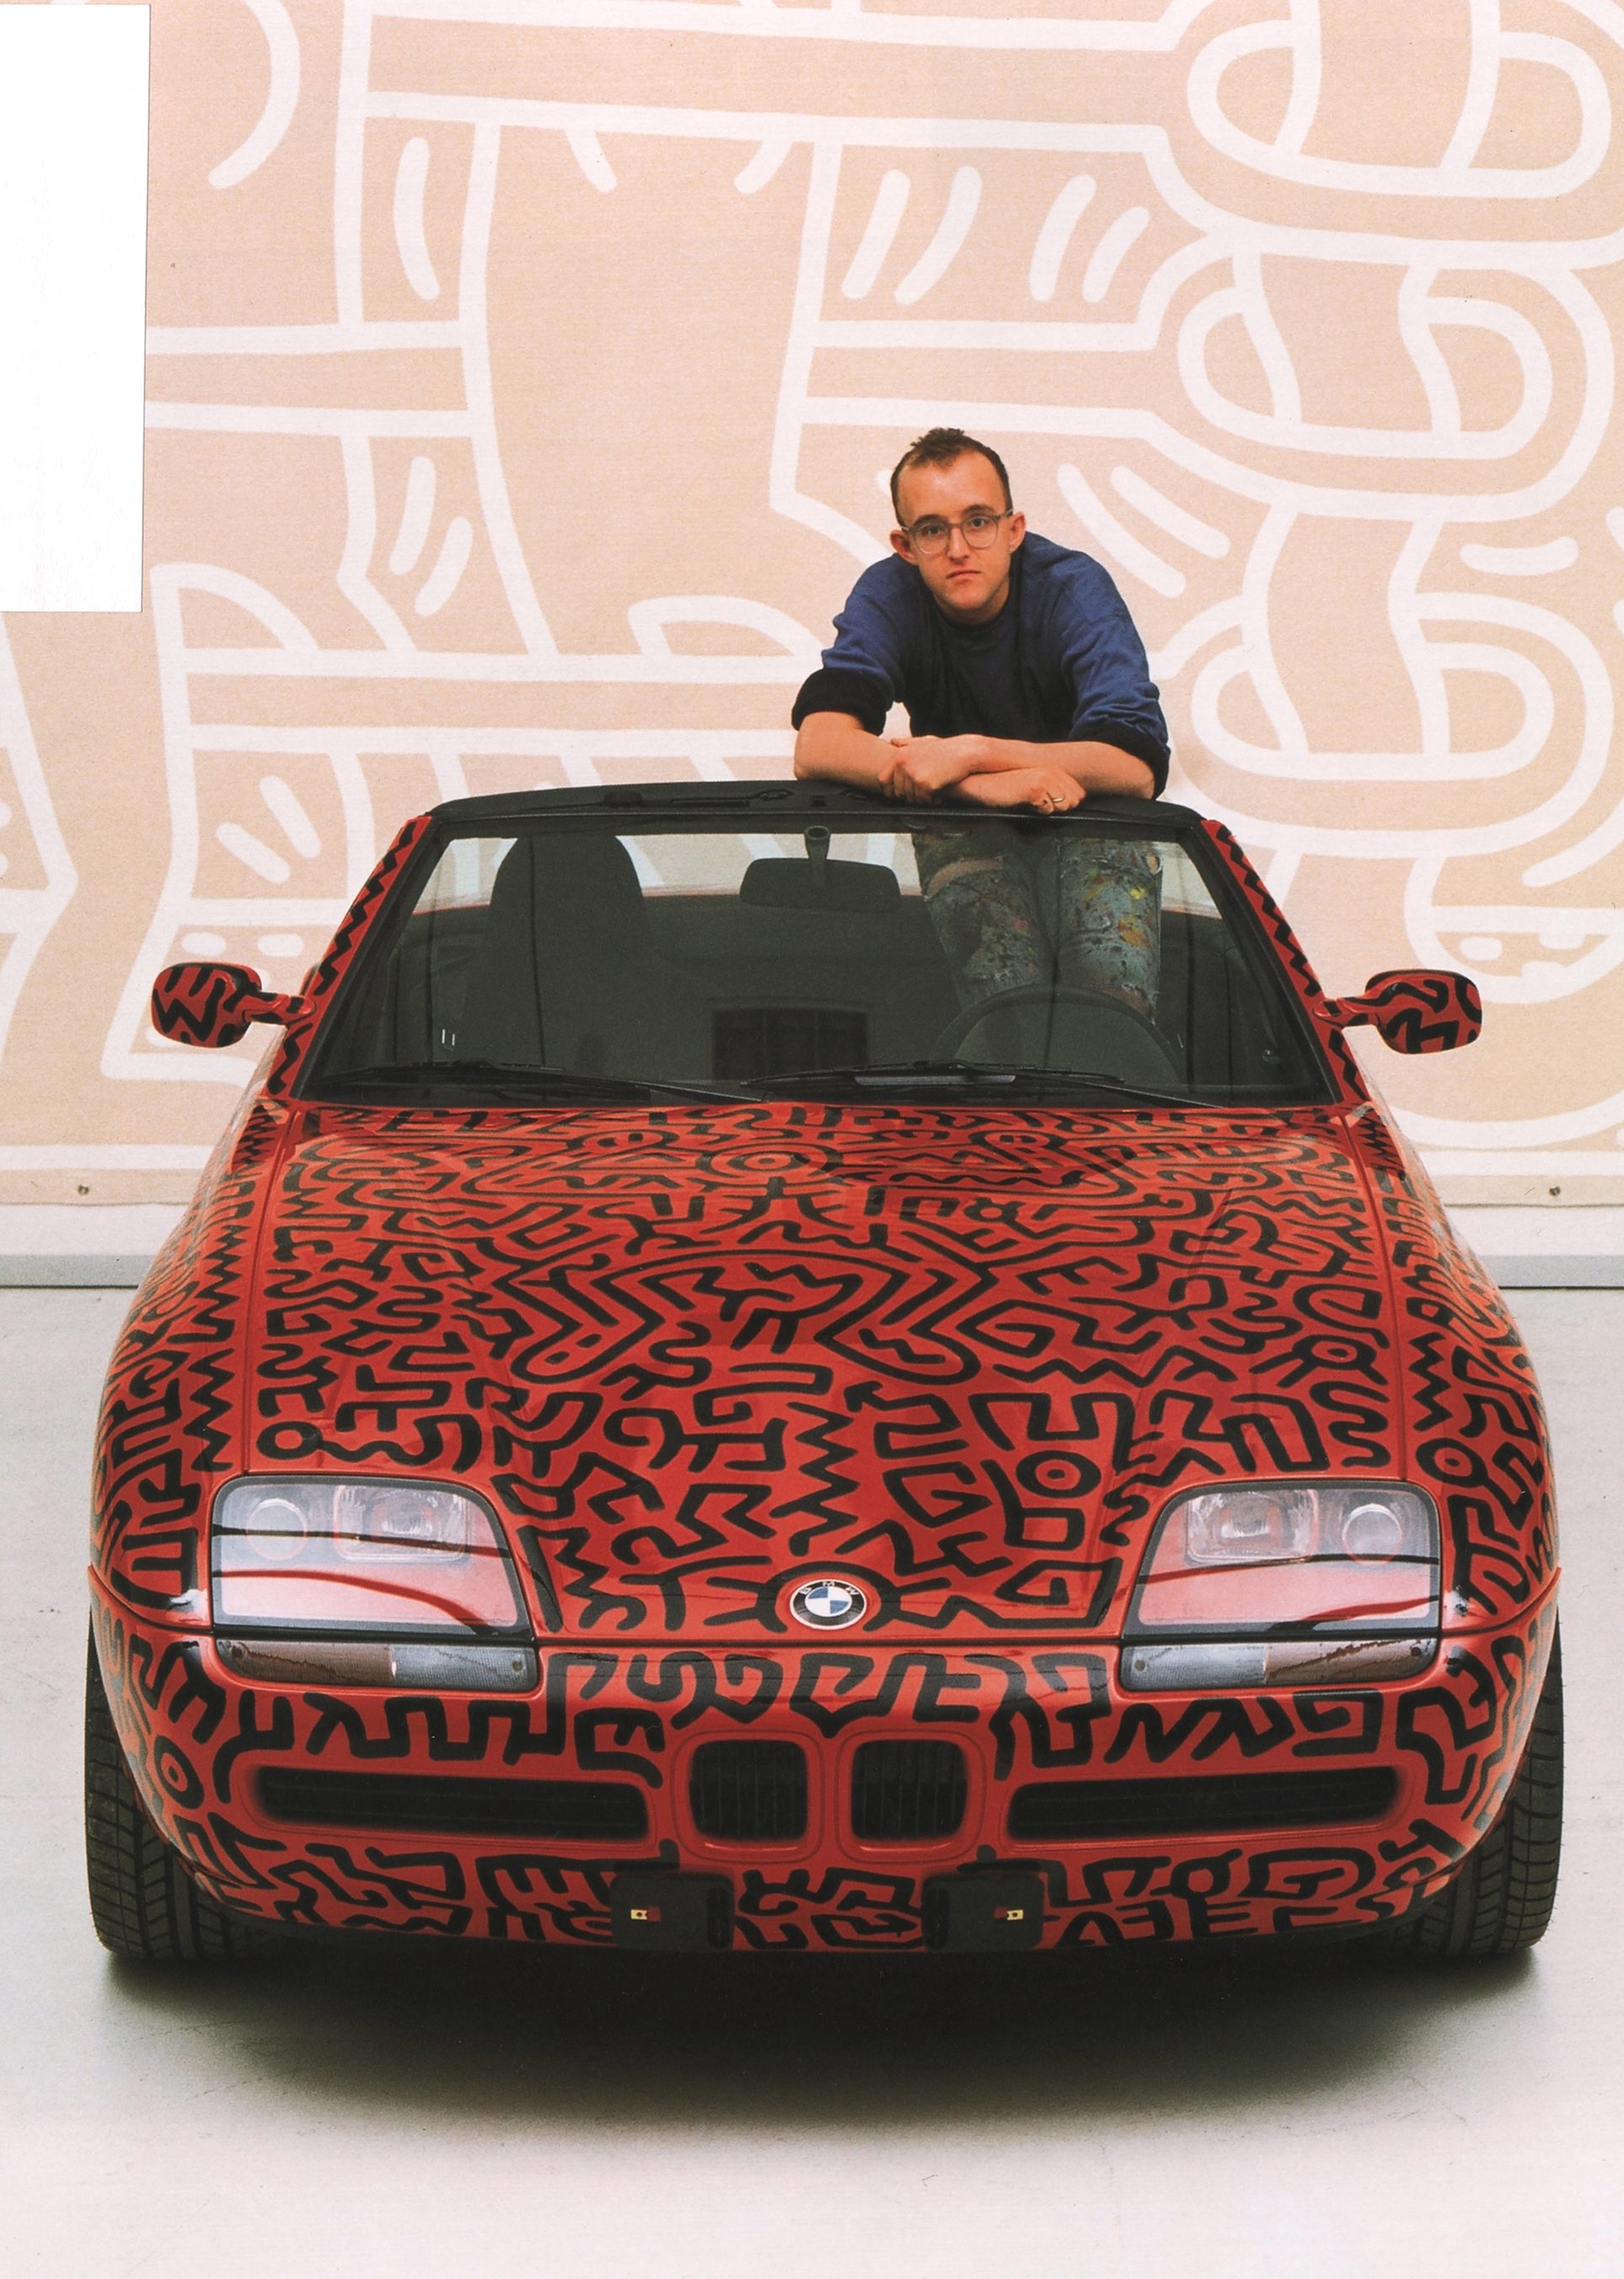 Rare Autos Painted by Keith Haring on Display at the Petersen Automotive Museum